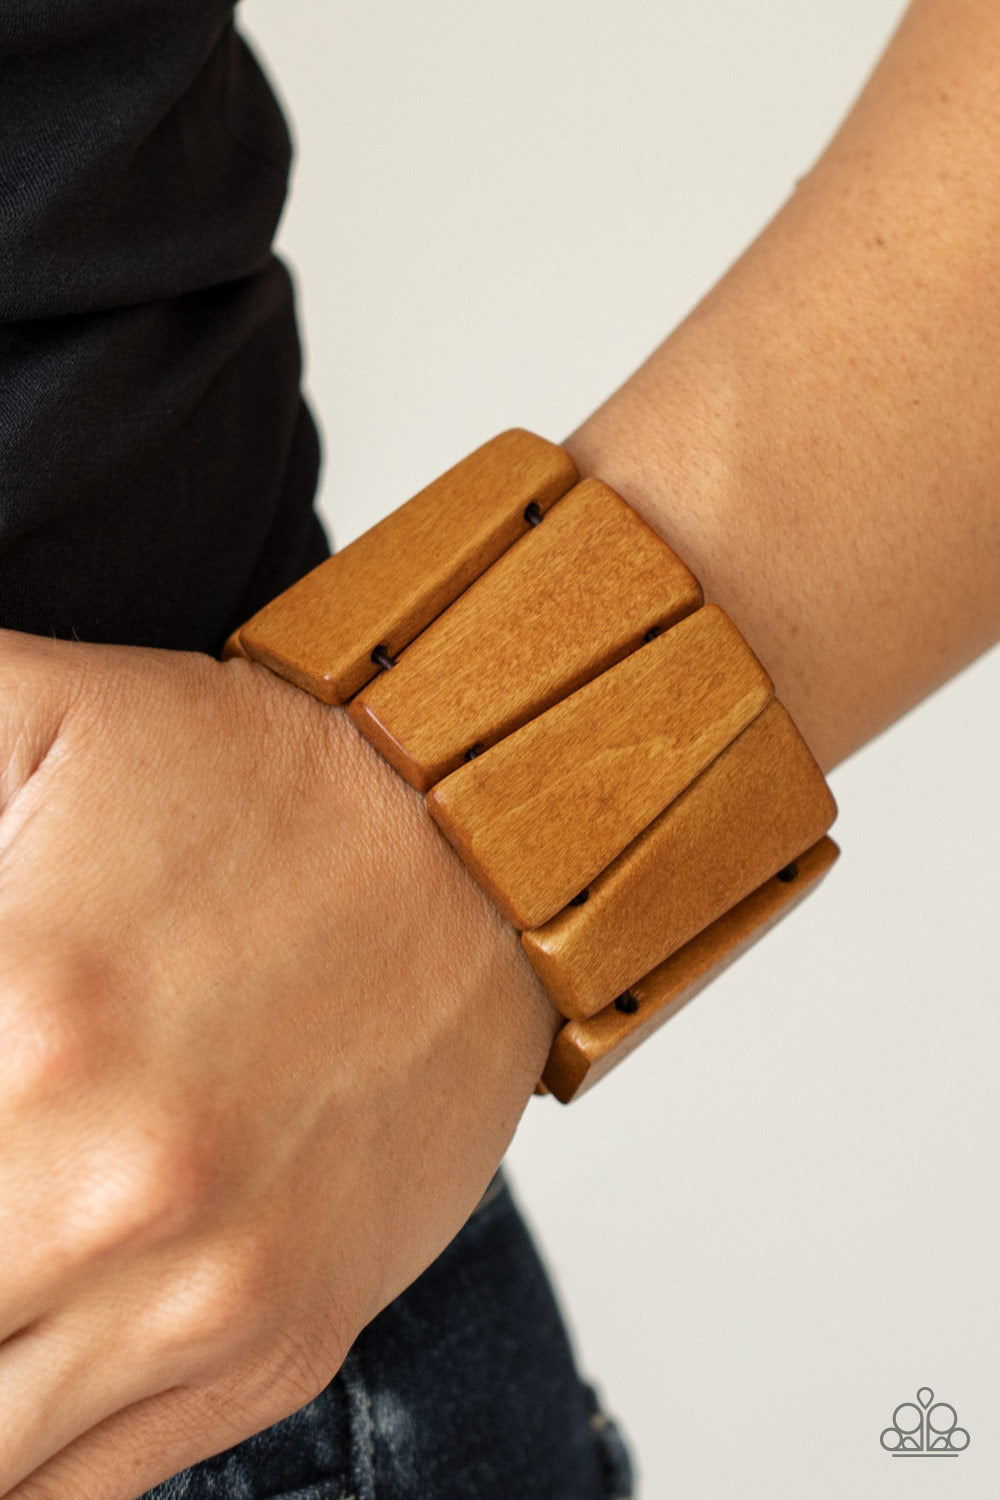 natural brown finish, chunky triangular wooden frames are threaded along stretchy bands around the wrist